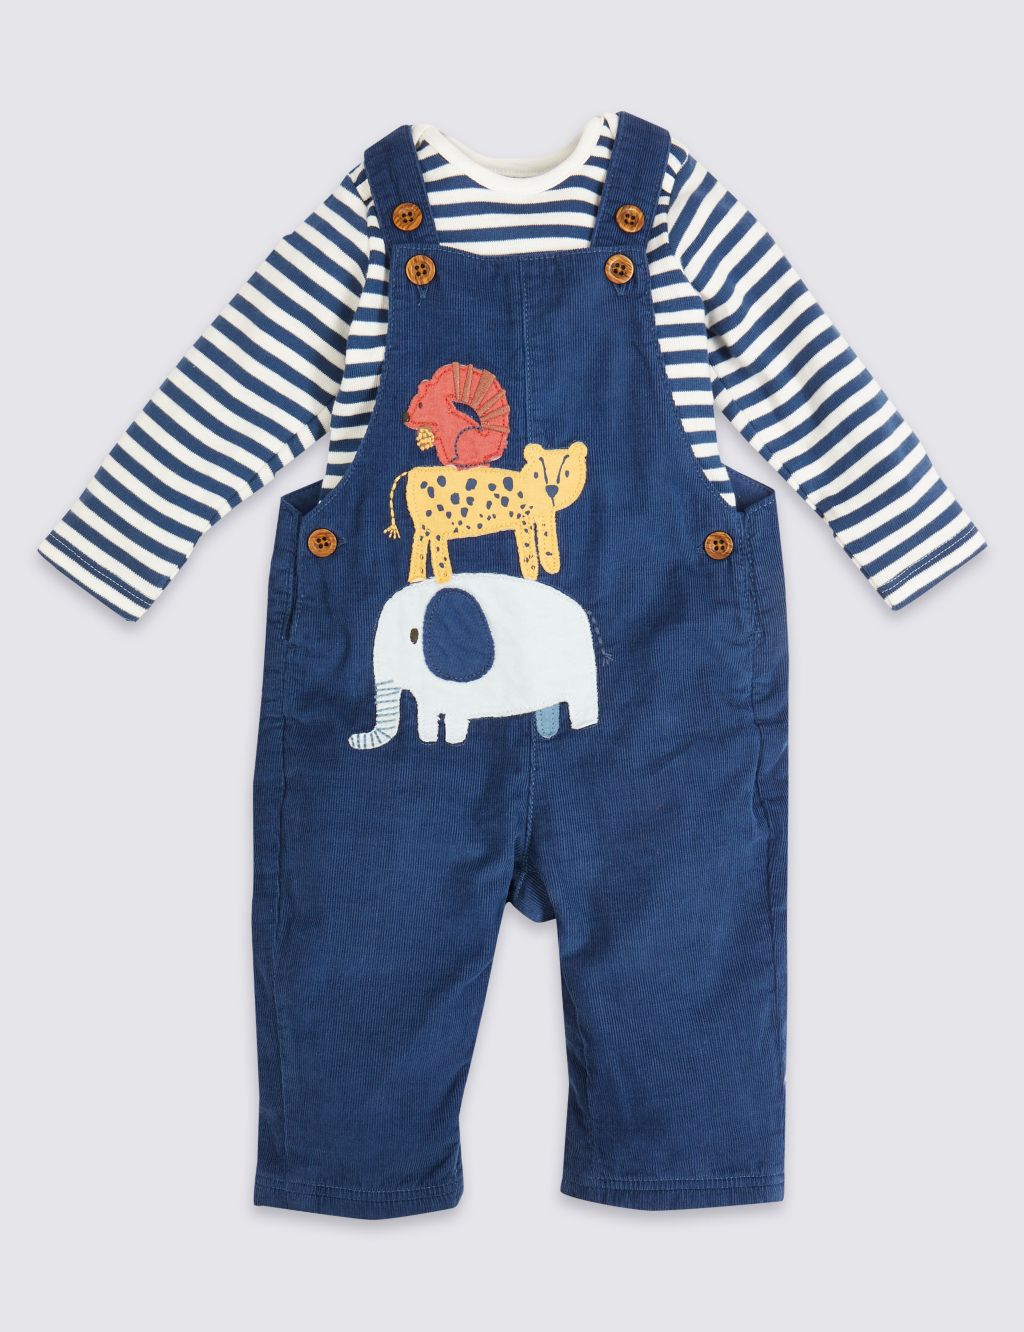 2pc Pure Cotton Dungarees Outfit (7lbs-36 Mths) image 1